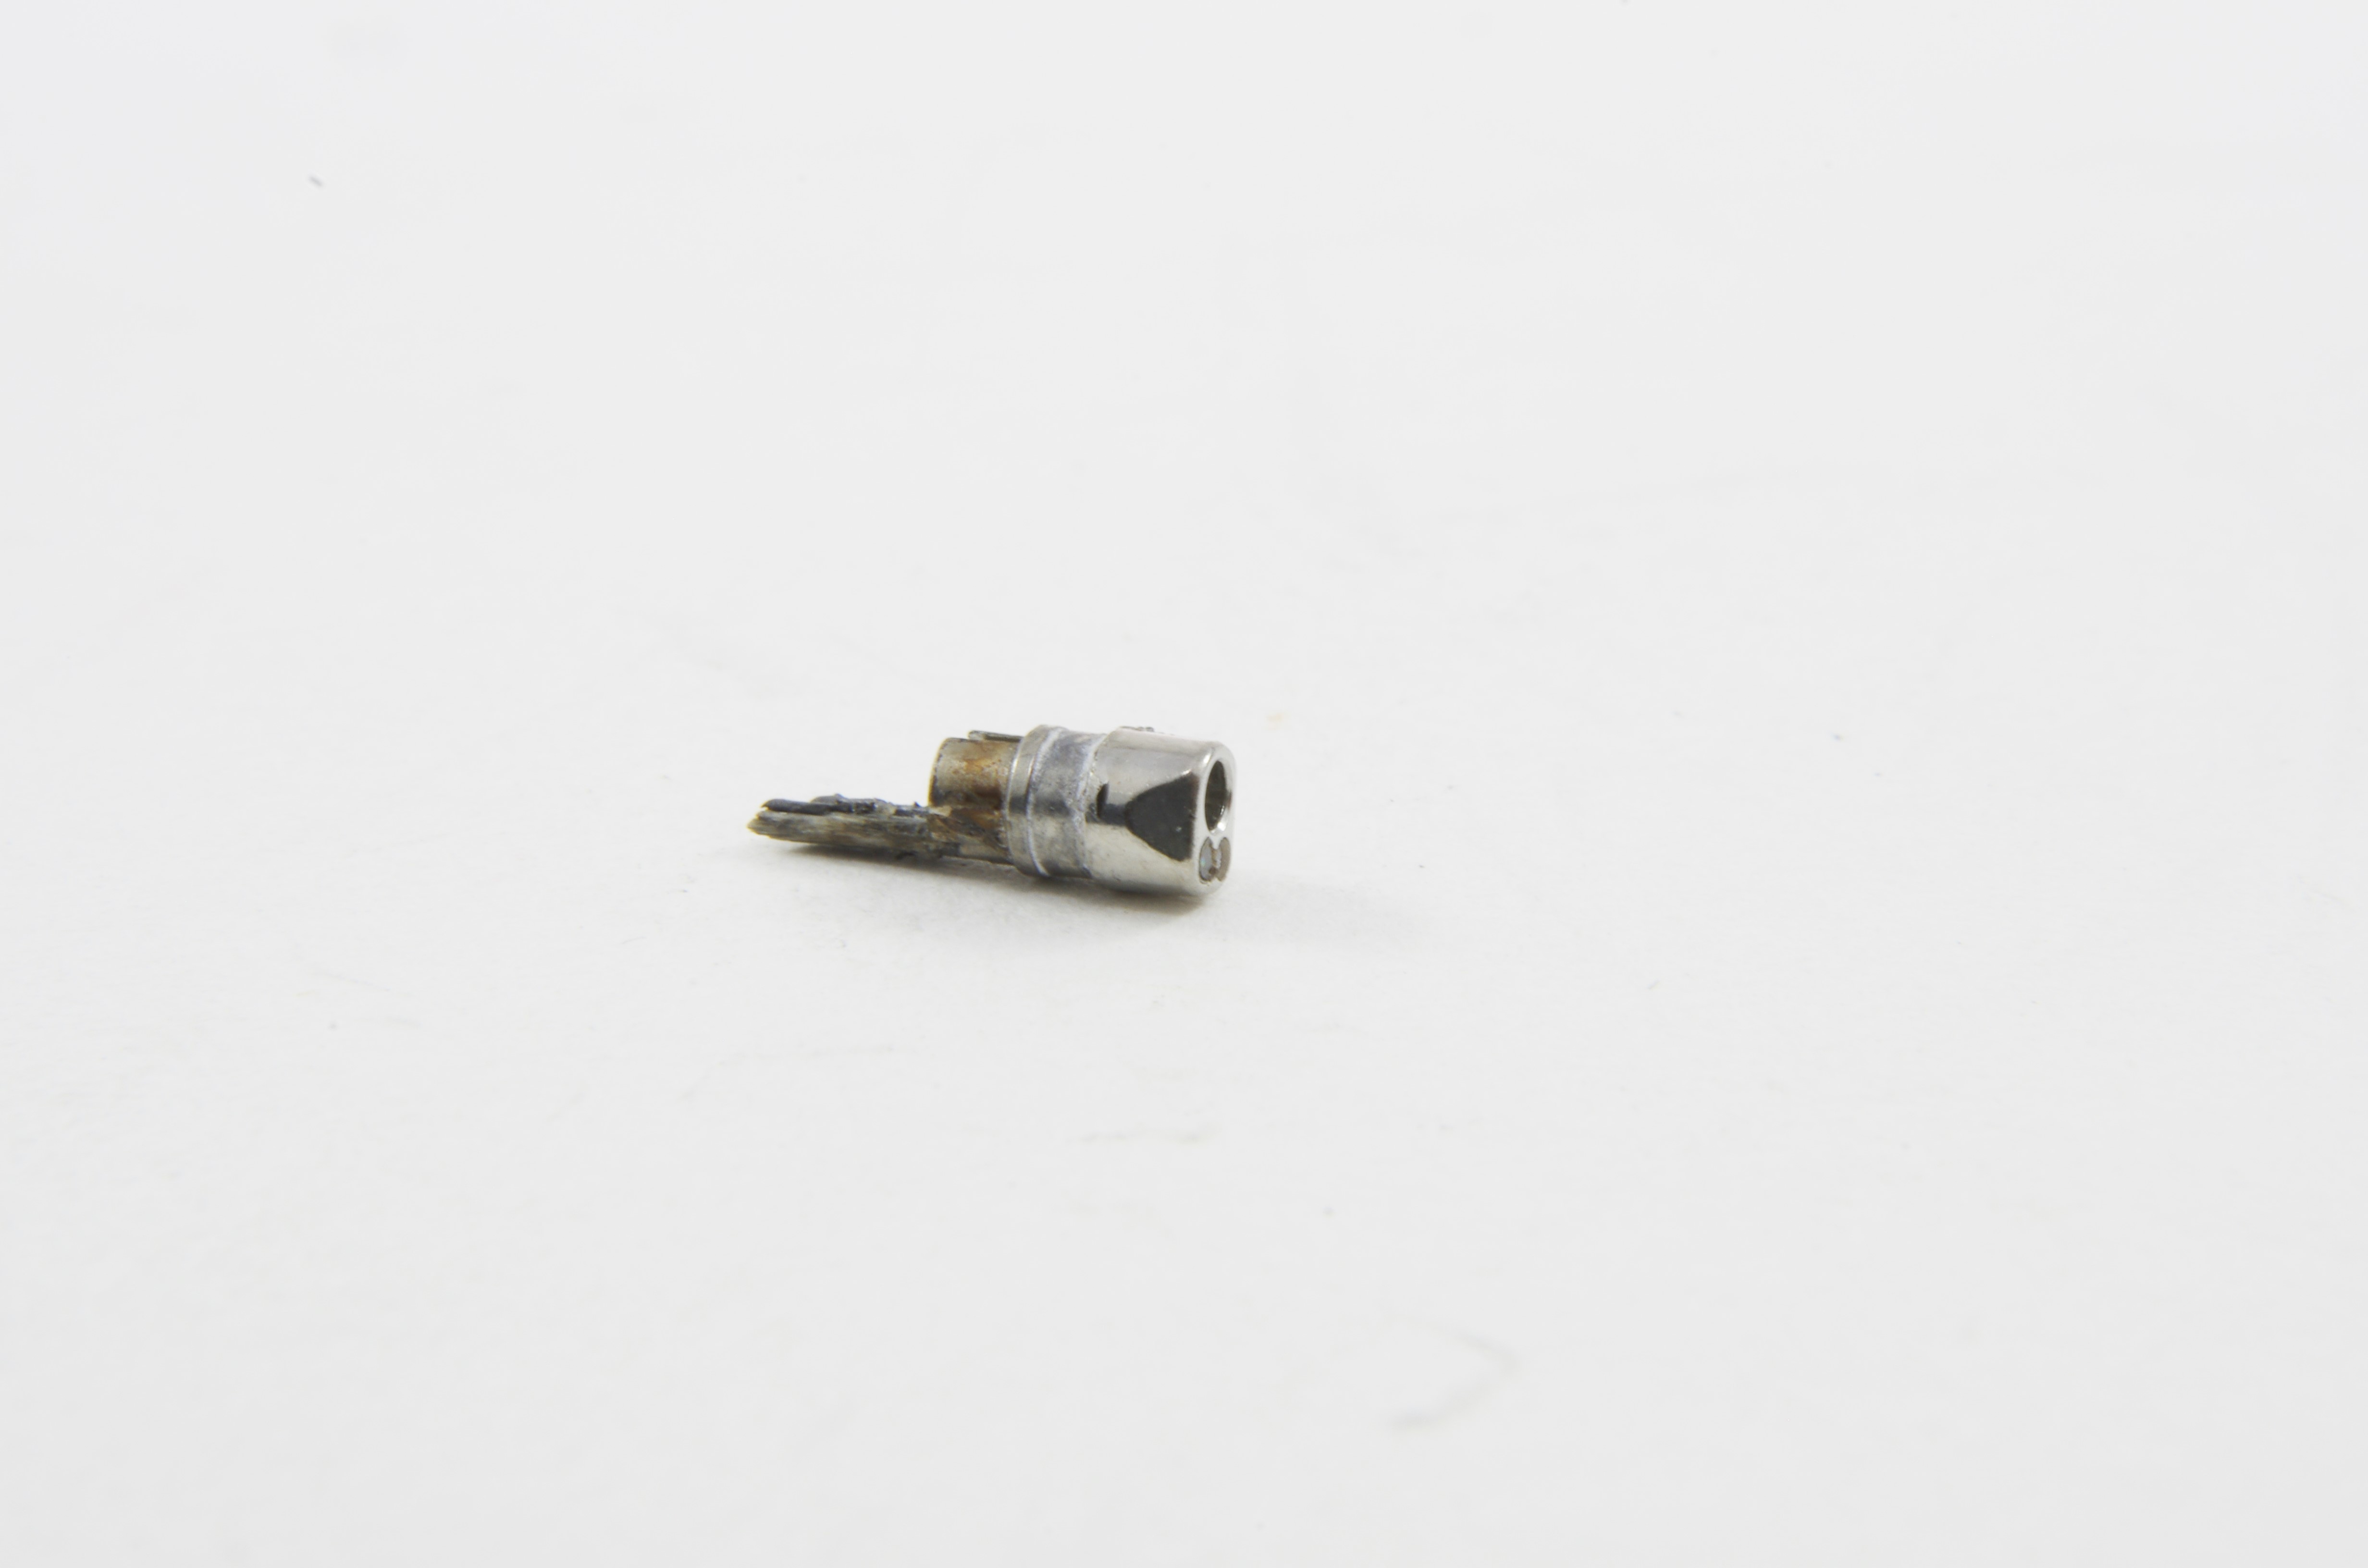 OEM Distal Tip with Lenses, C-Cover, and Objective Stack - URF-P3, CHF-CB30L